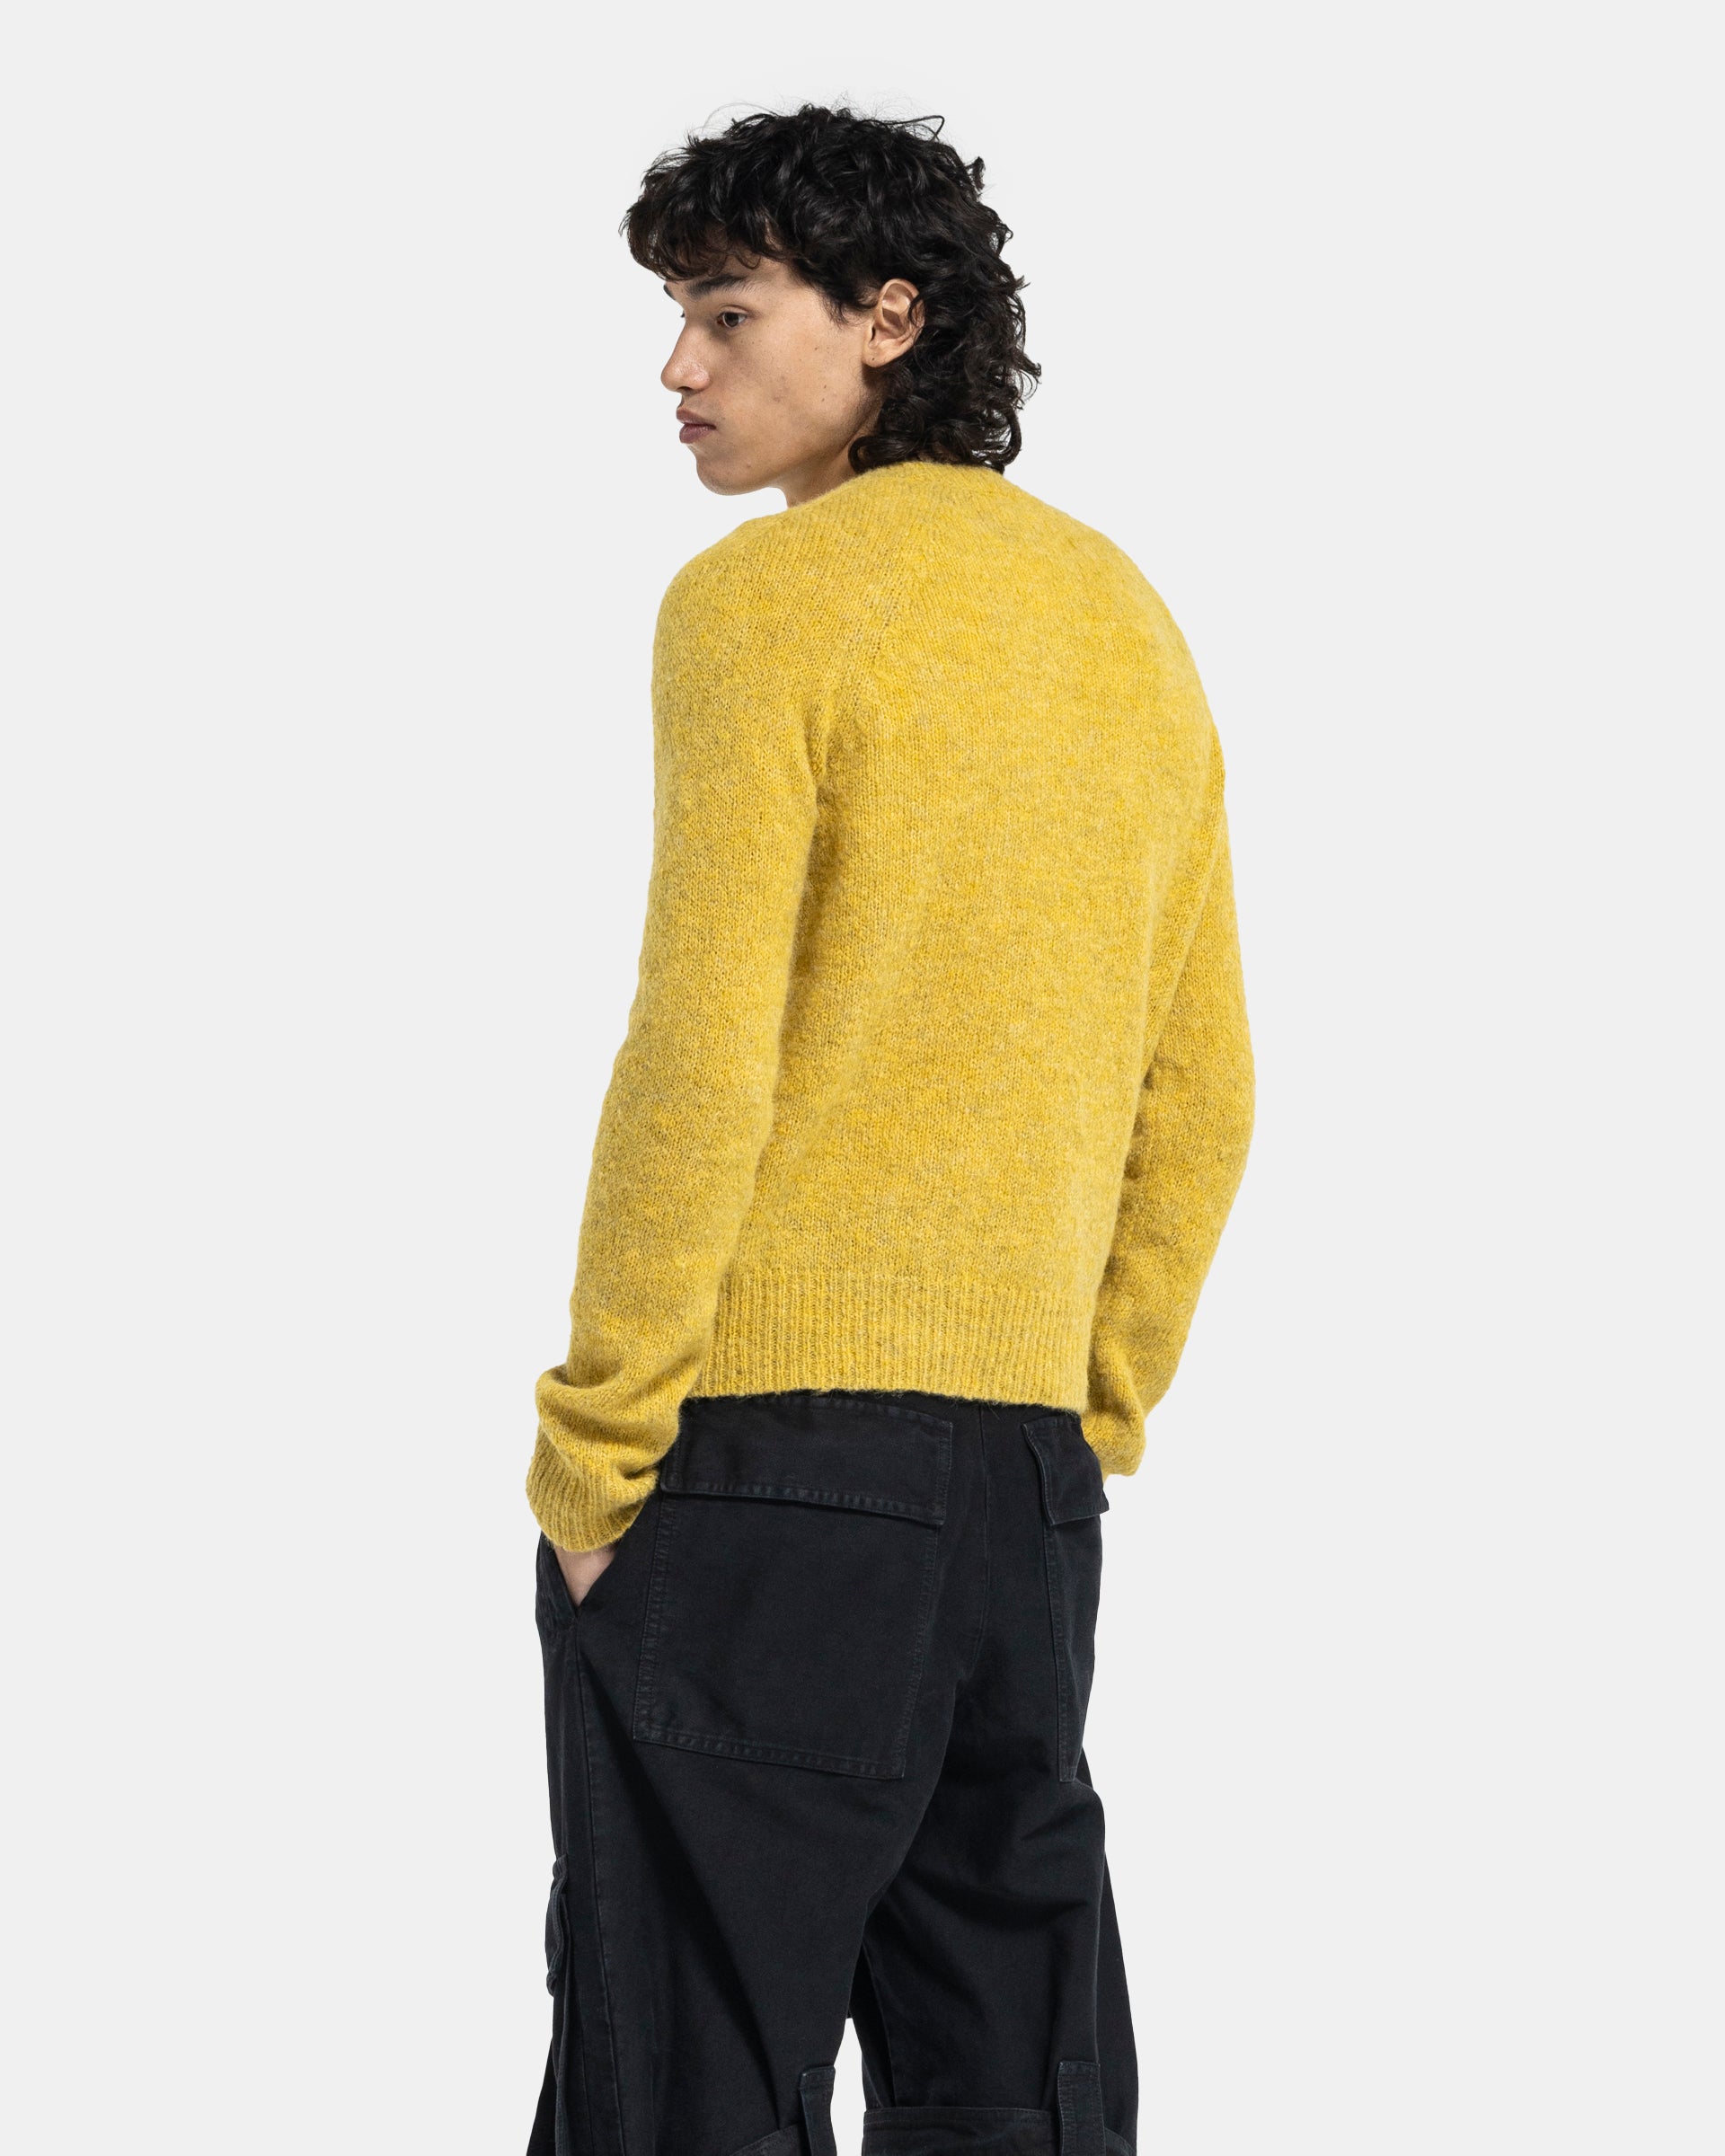 Melbourne MK Sweater in Yellow